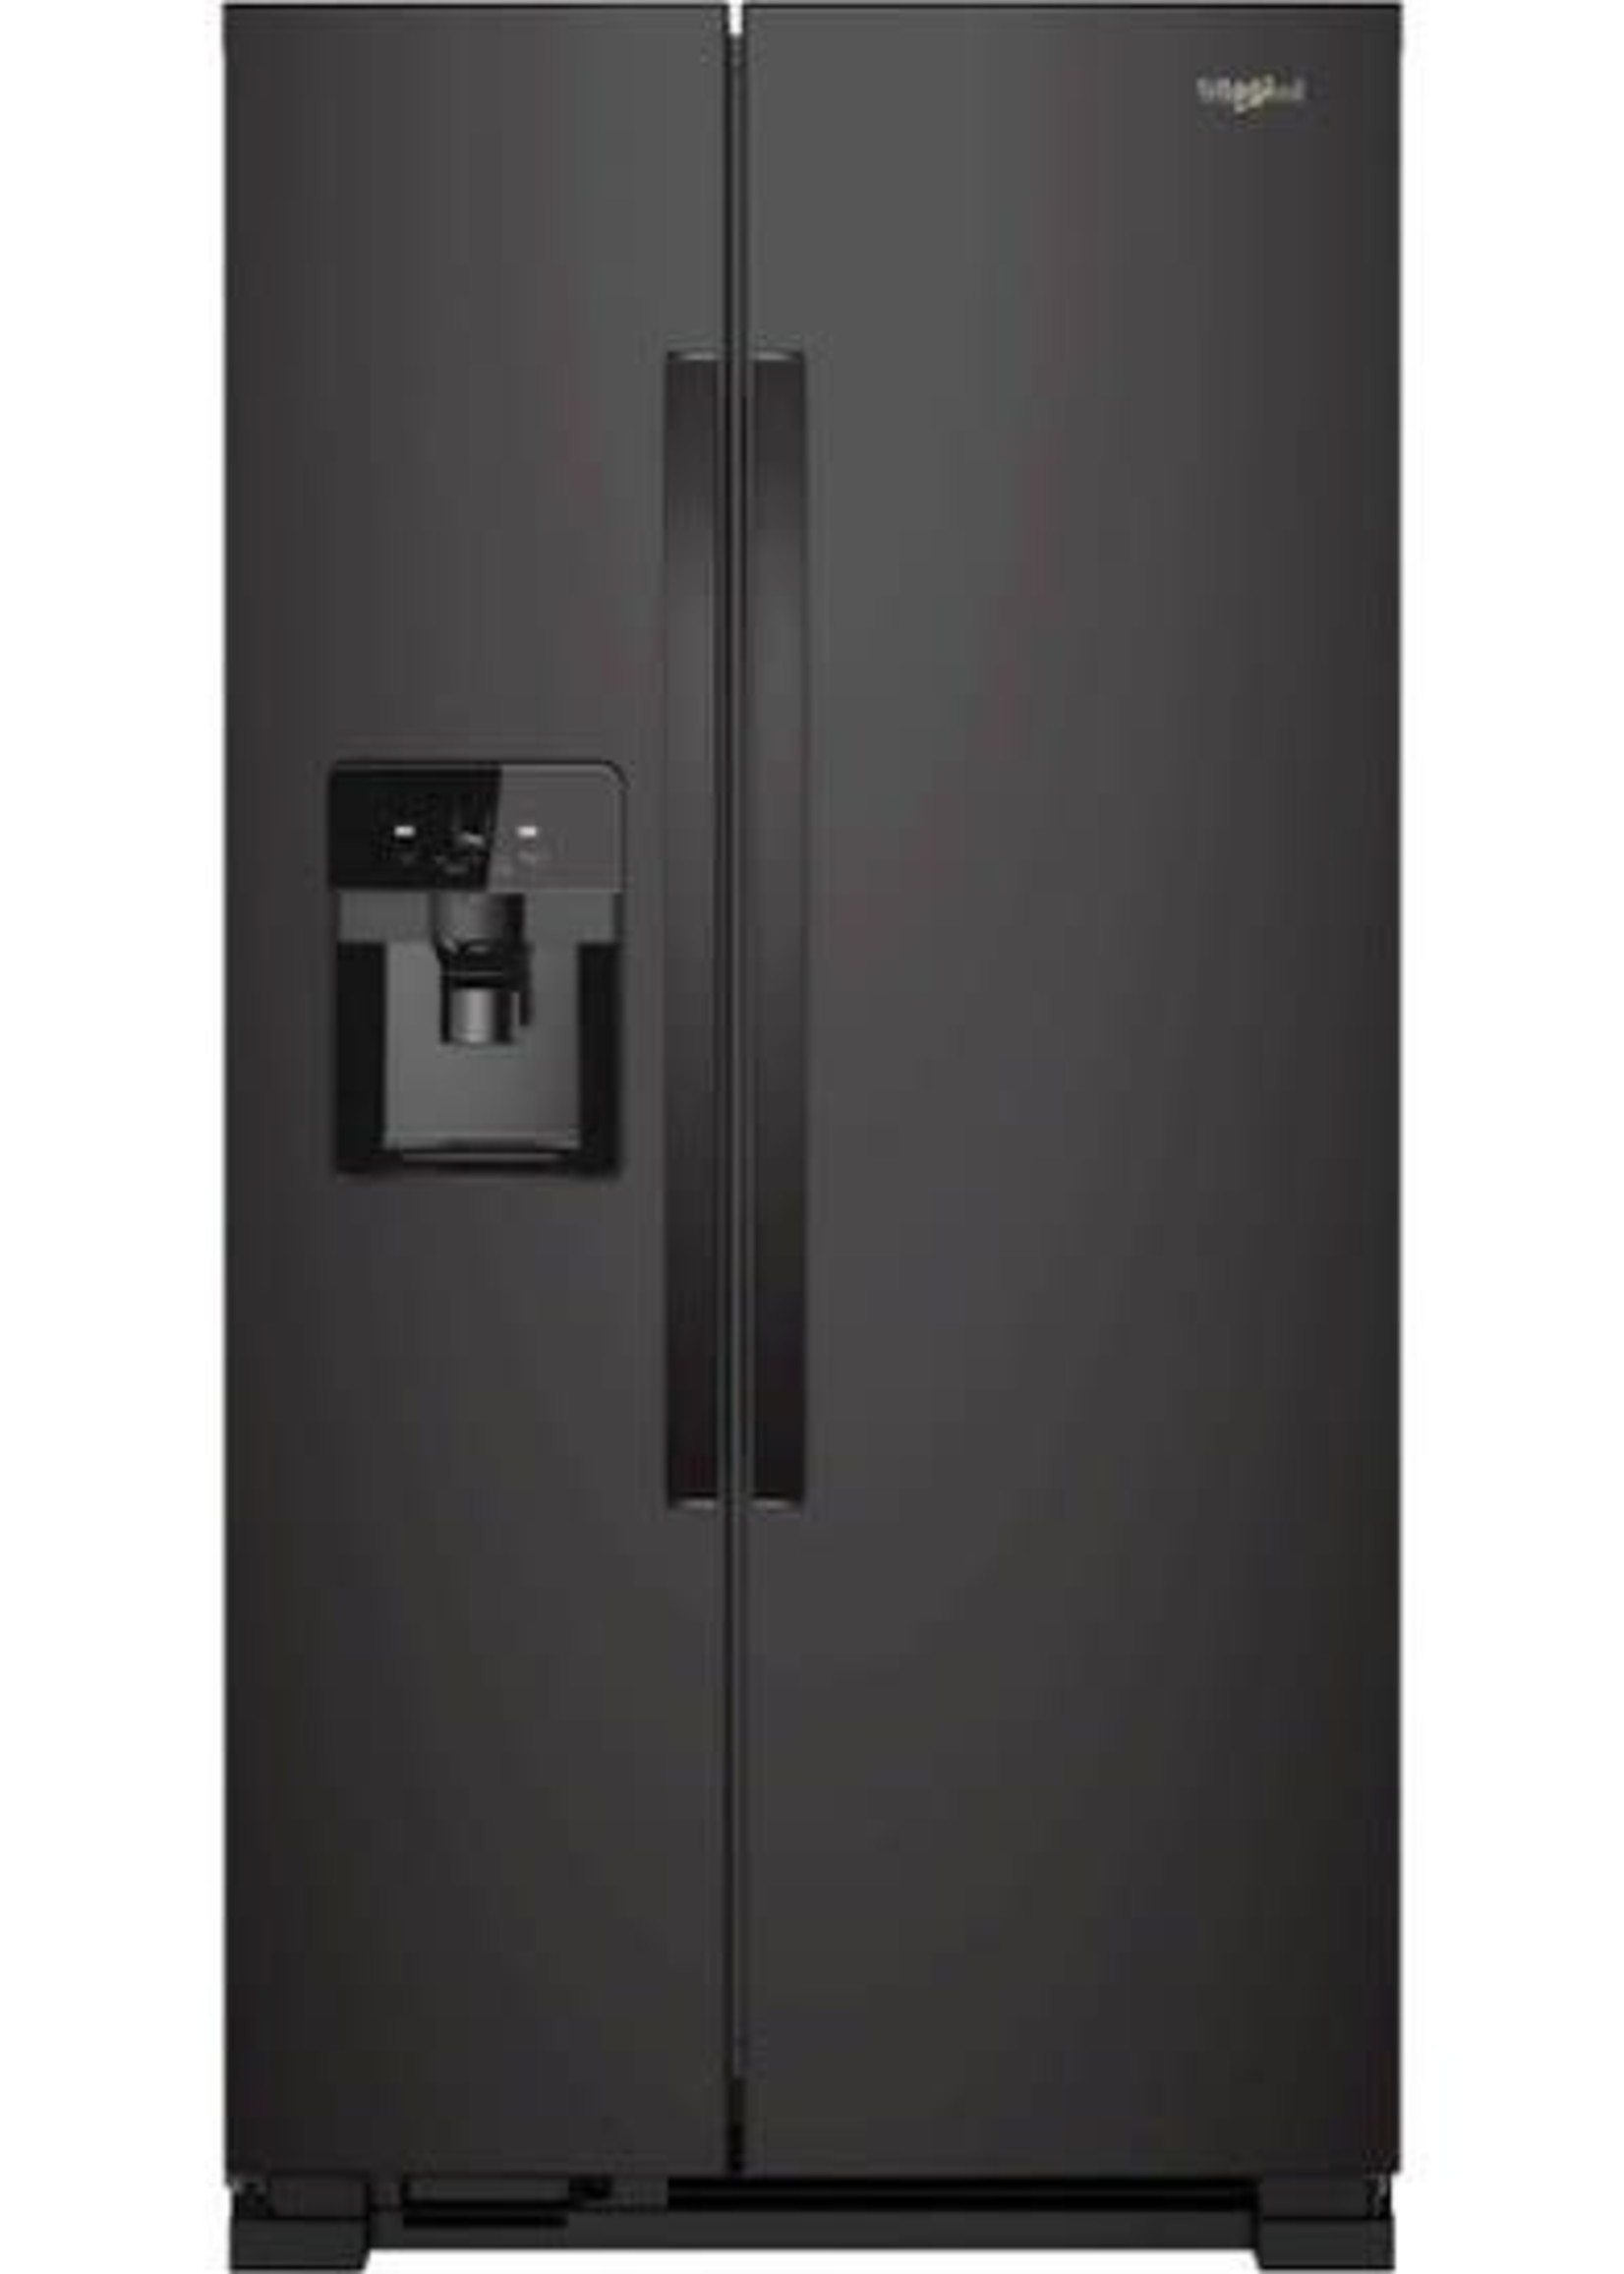 Whirlpool *Whirlpool WRS325SDHB   24.6 Cu. Ft. Side-by-Side Refrigerator with Water and Ice Dispenser - Black